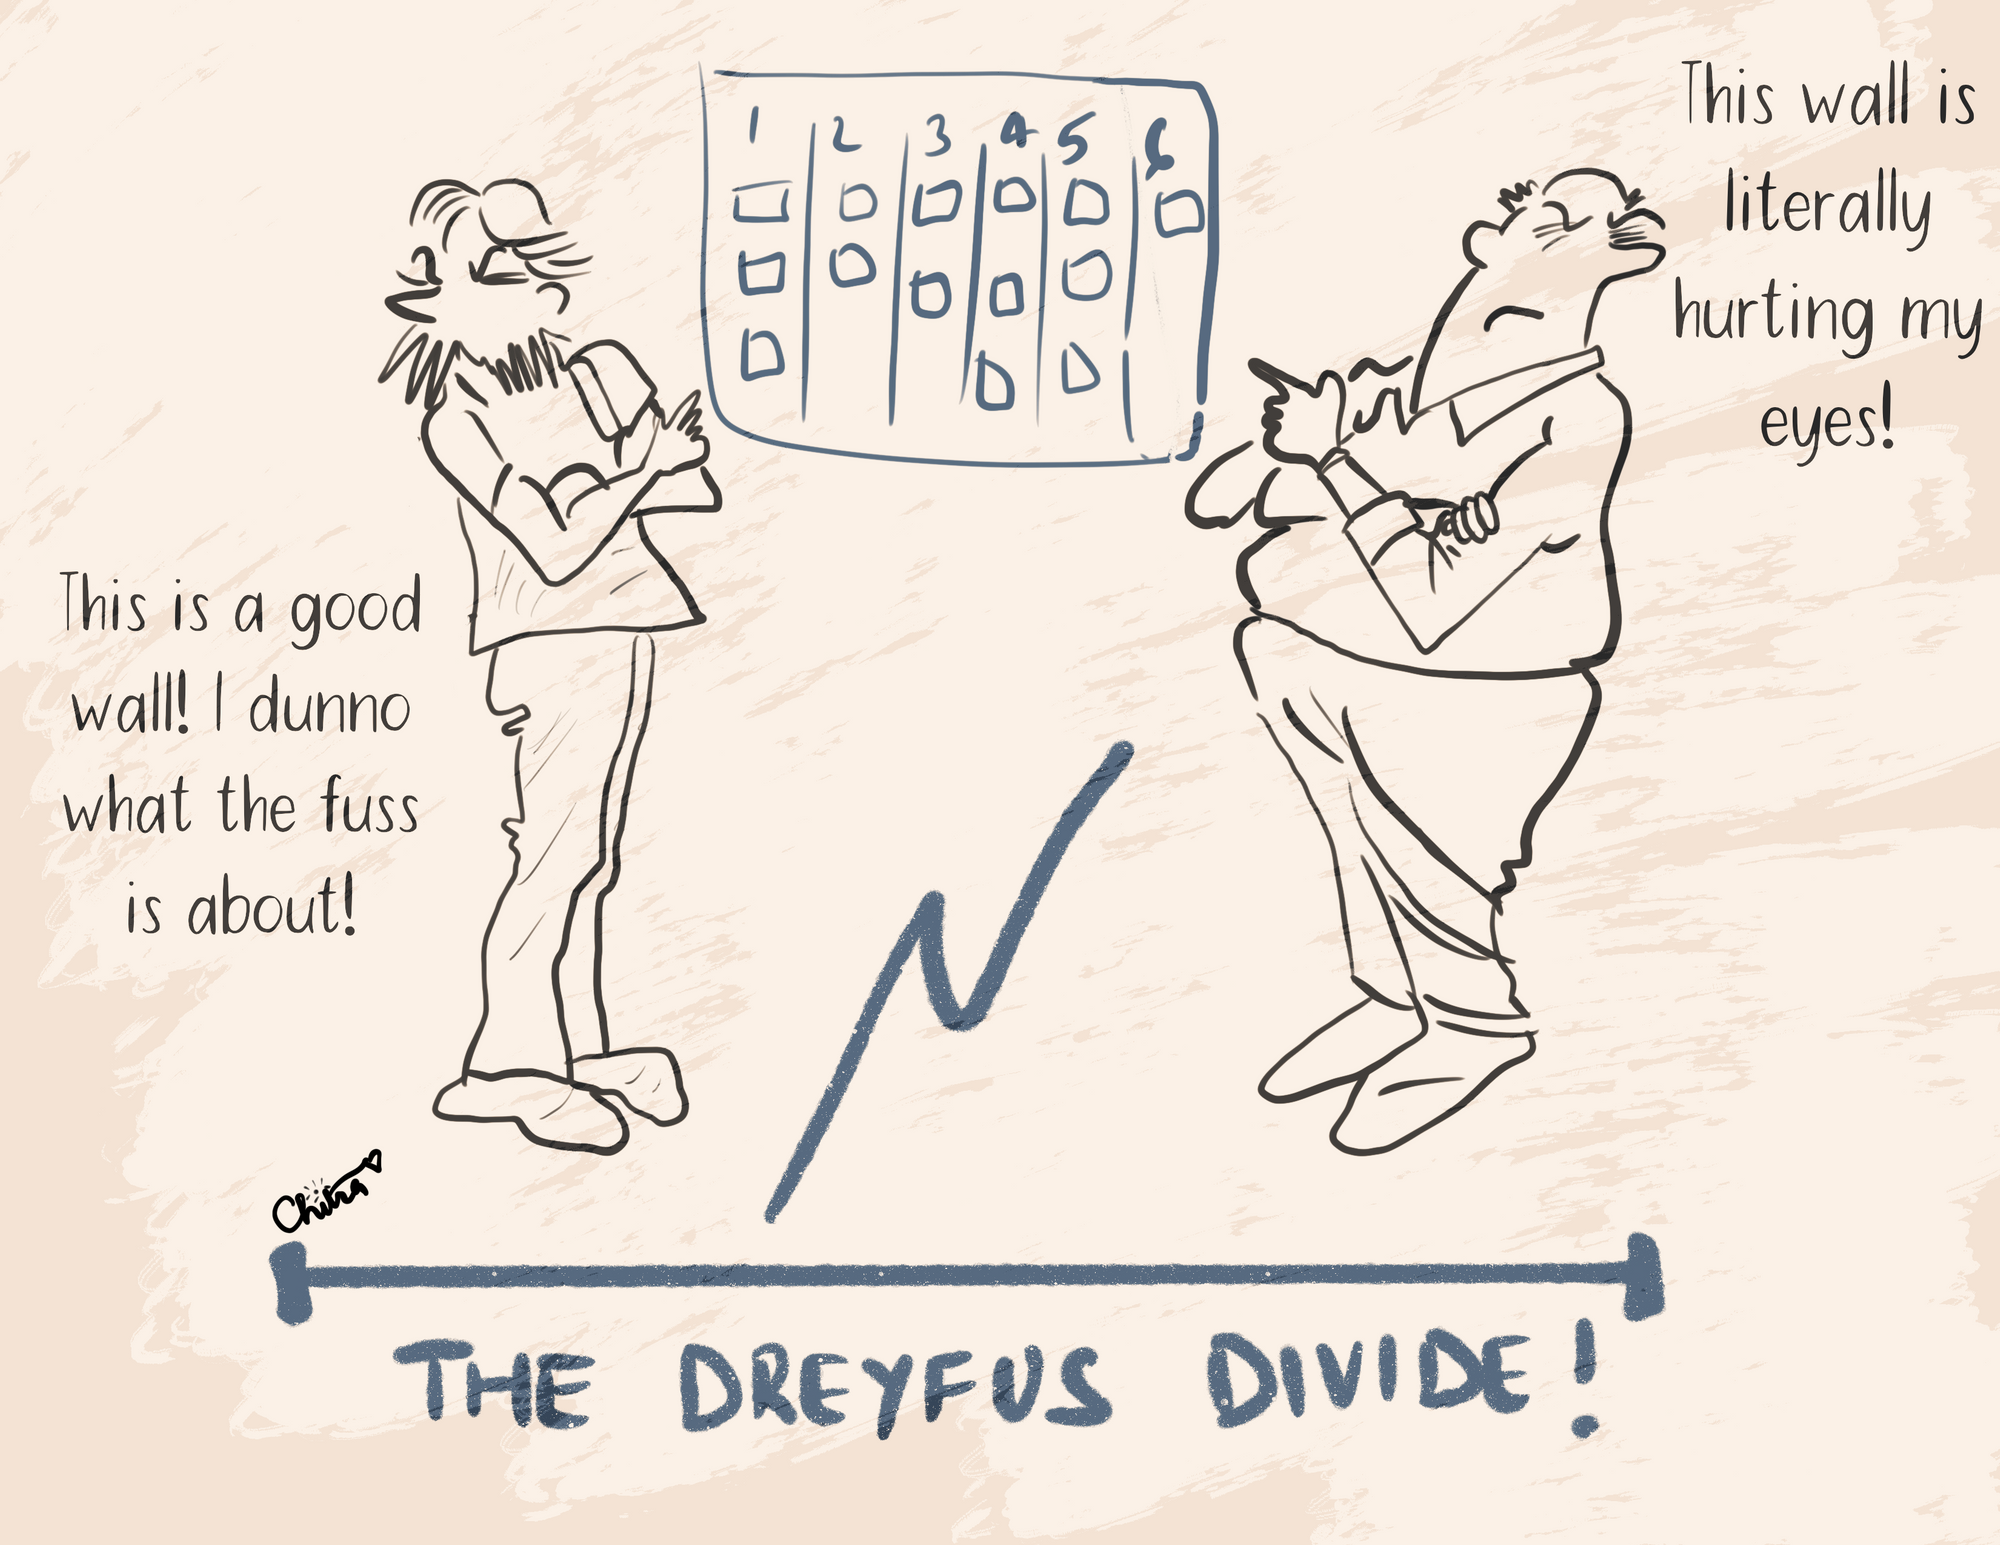 Illustration of 2 colleagues. 1 is looking away from the 6 lane project wall and saying "this is hurting my eyes". The other is saying "I don't know what the fuss is about'. The title of the image is The Dreyfus Divide.